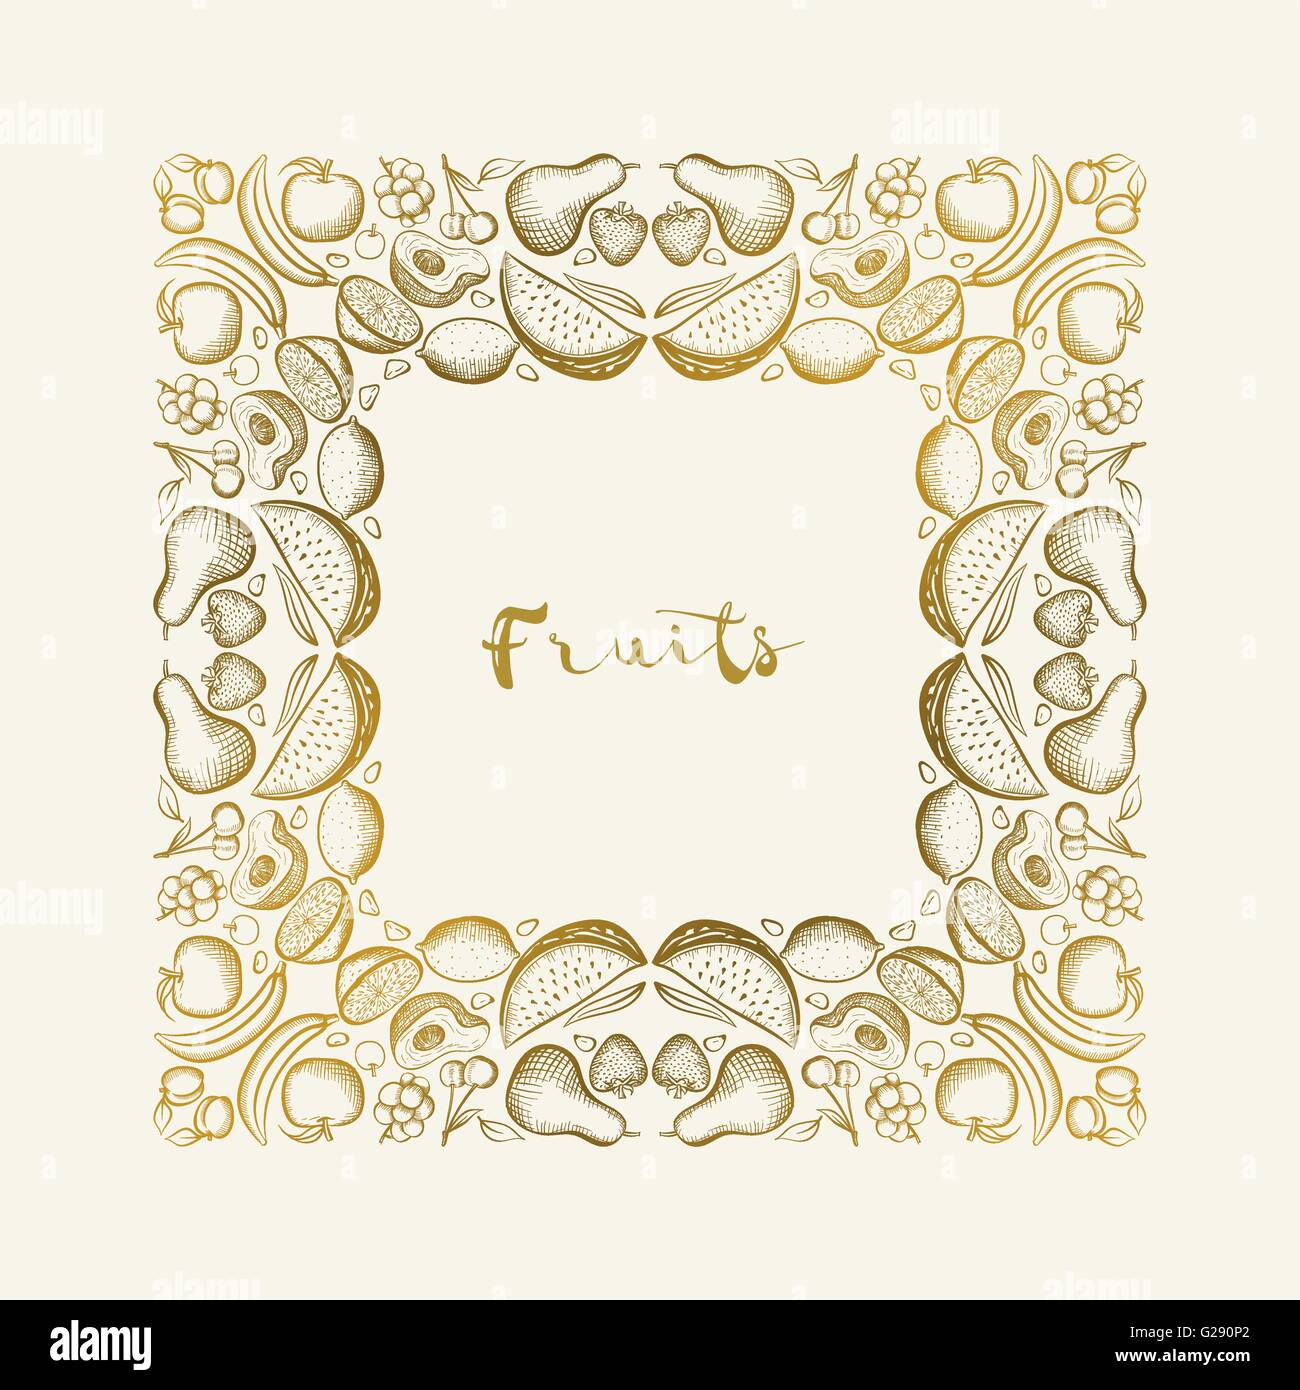 Vector hand drawn frame. Border is made with seamless pattern with various fruits. Stock Vector